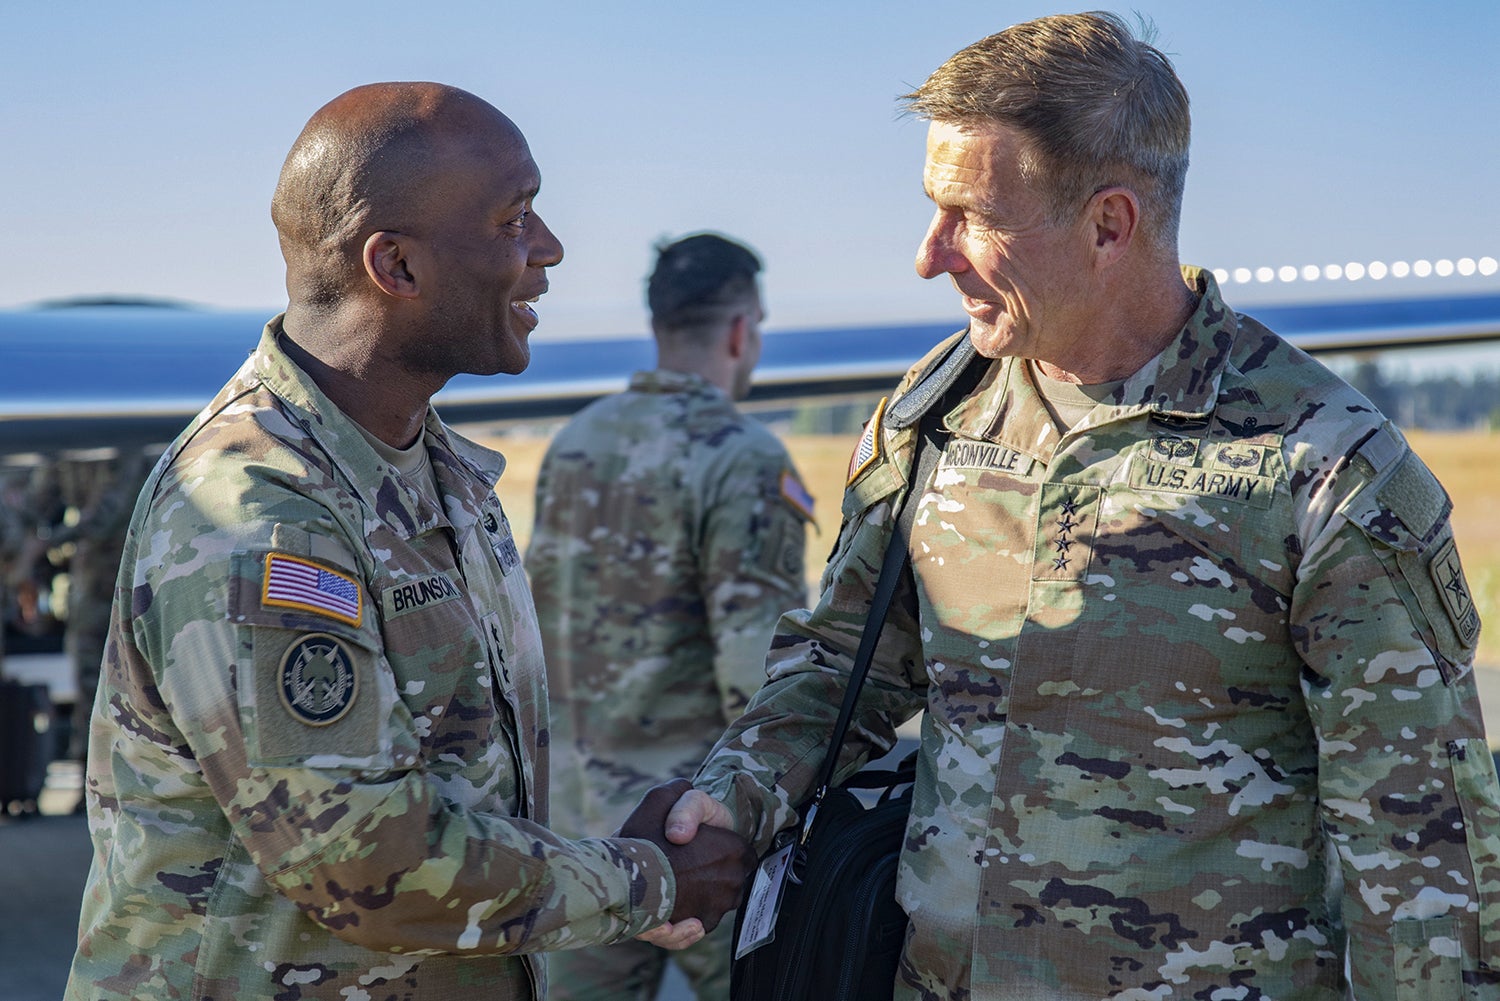 Lt. Gen. Xavier Brunson, left, commander of I Corps, greets Army Chief of Staff Gen. James McConville at Joint Base Lewis-McChord, Washington. (Credit: U.S. Army/Spc. Richard Carlisi)